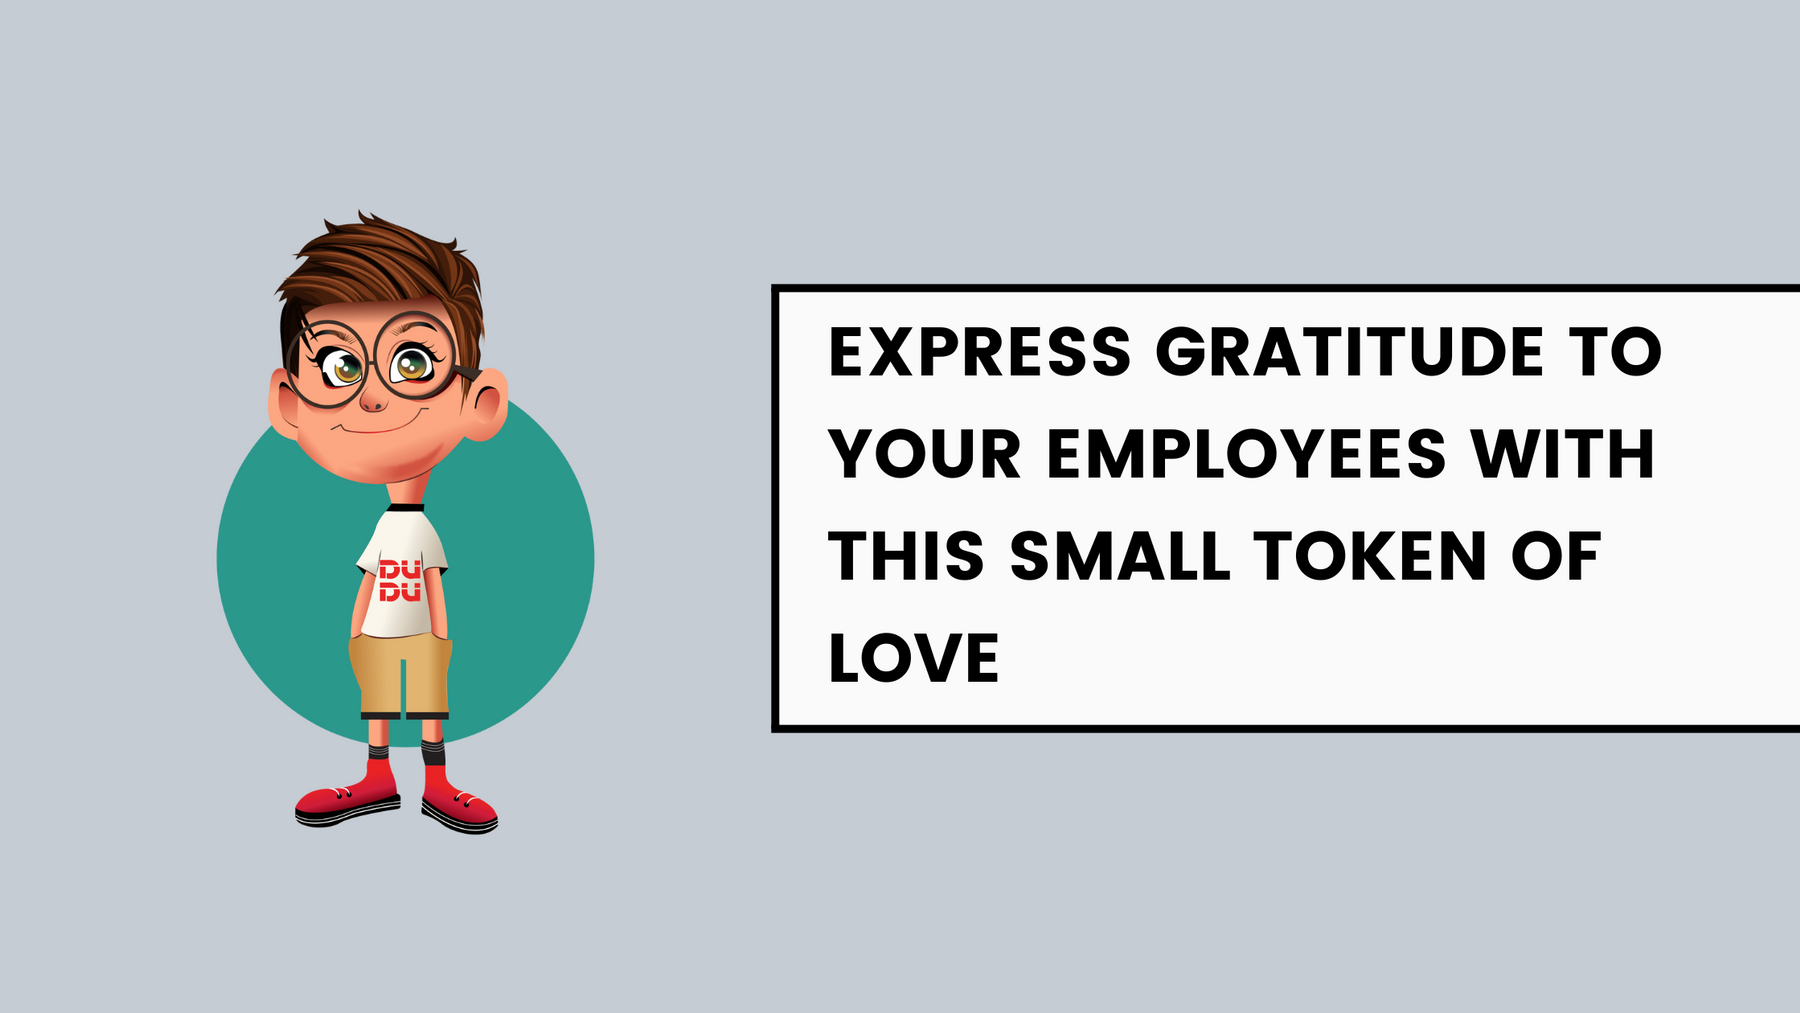 Corporate Diwali Gift: Express Gratitude to Your Employees With This Small Token of Love